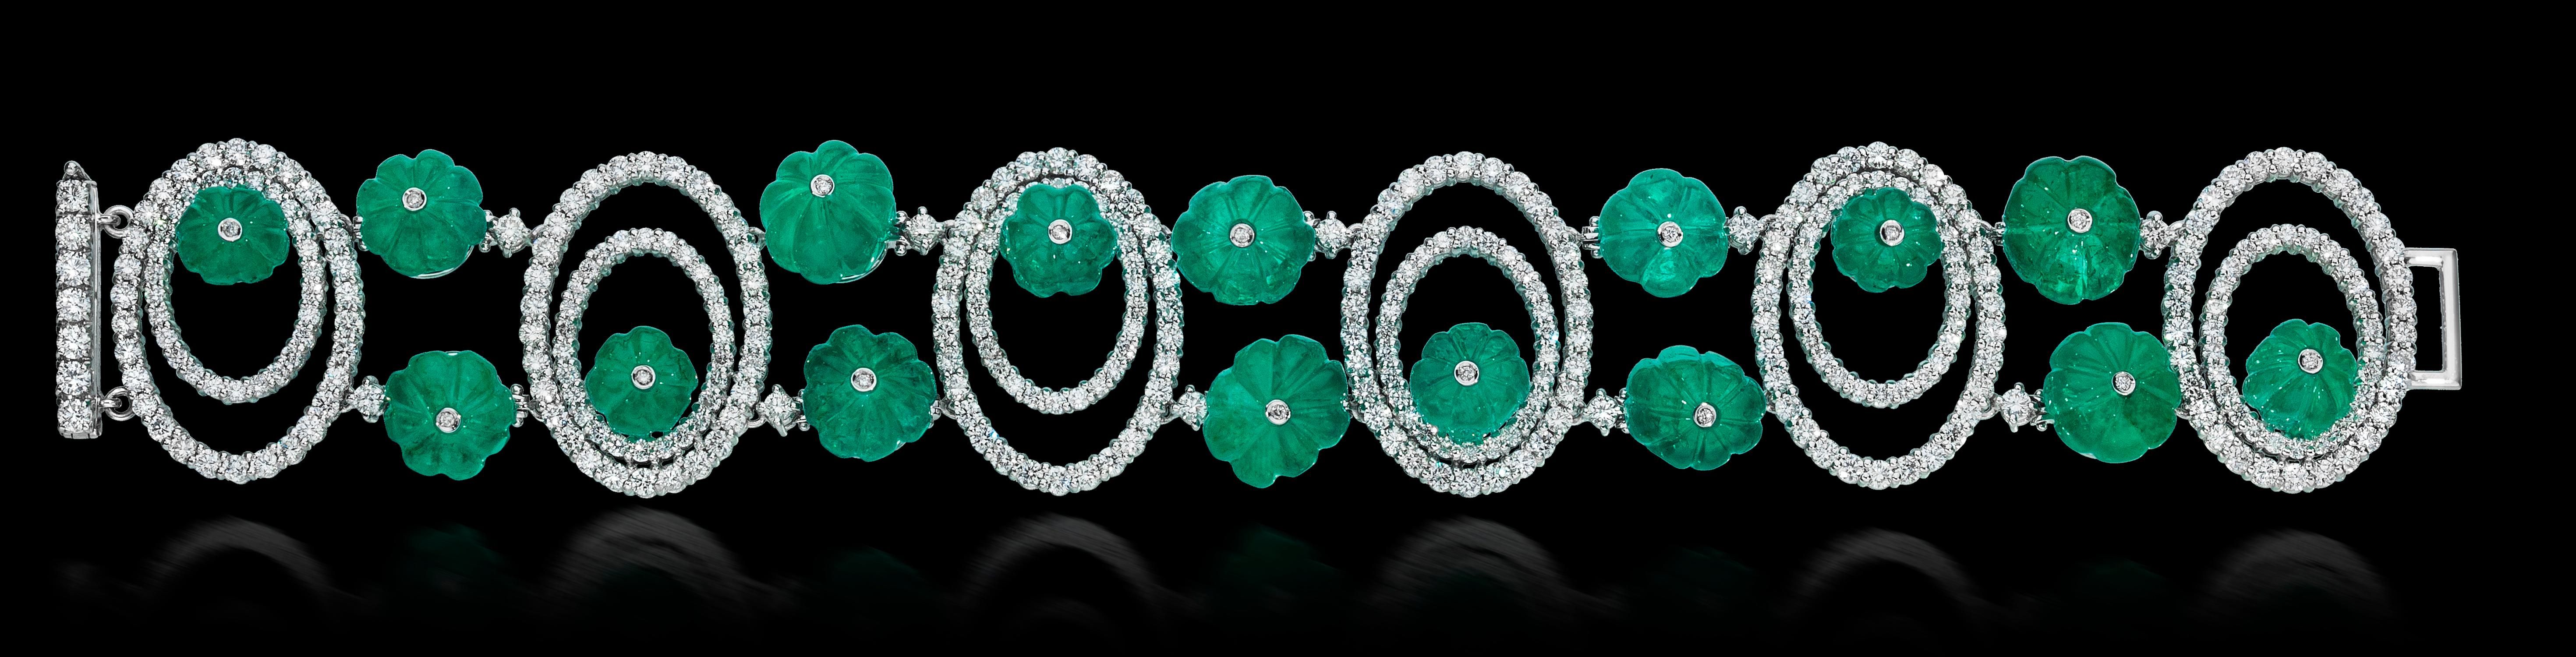 Andreoli Carved Colombian Emerald Diamond Sphere Bracelet 18KT White Gold

This Andreoli Masterpiece is surrounded by 12.51 carats of full round cut brilliant diamonds F/G/H Color VS-SI Clarity. There are 93.26 carats of Vivid Green Colombian